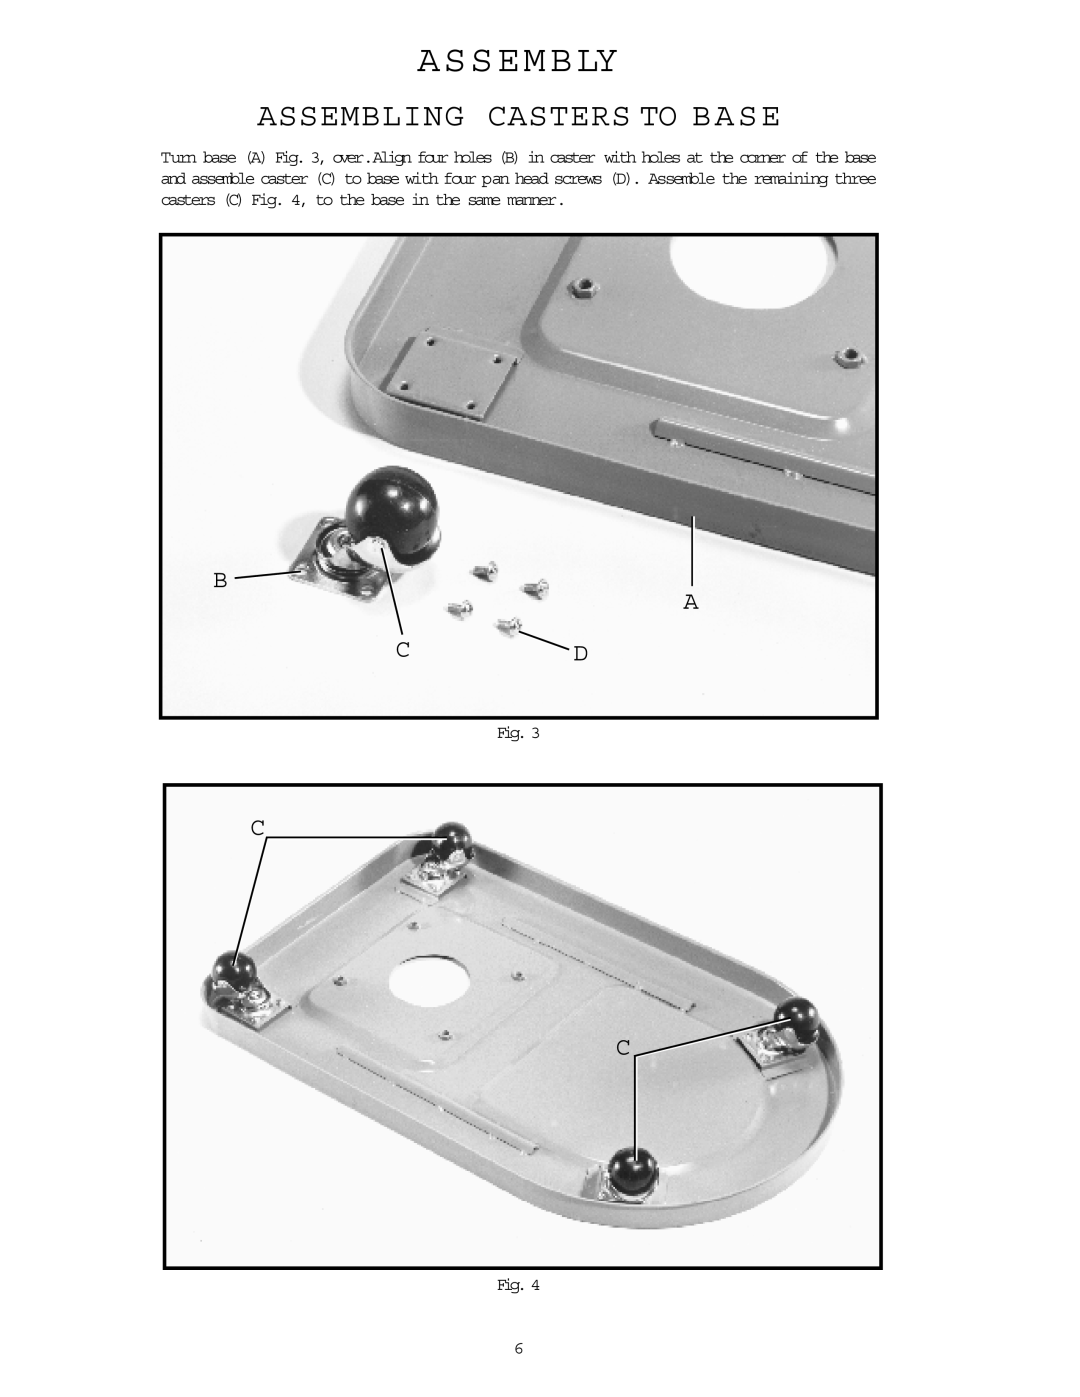 Delta 50-840 instruction manual Assembly, Assembling Casters To Base, B A Cd 